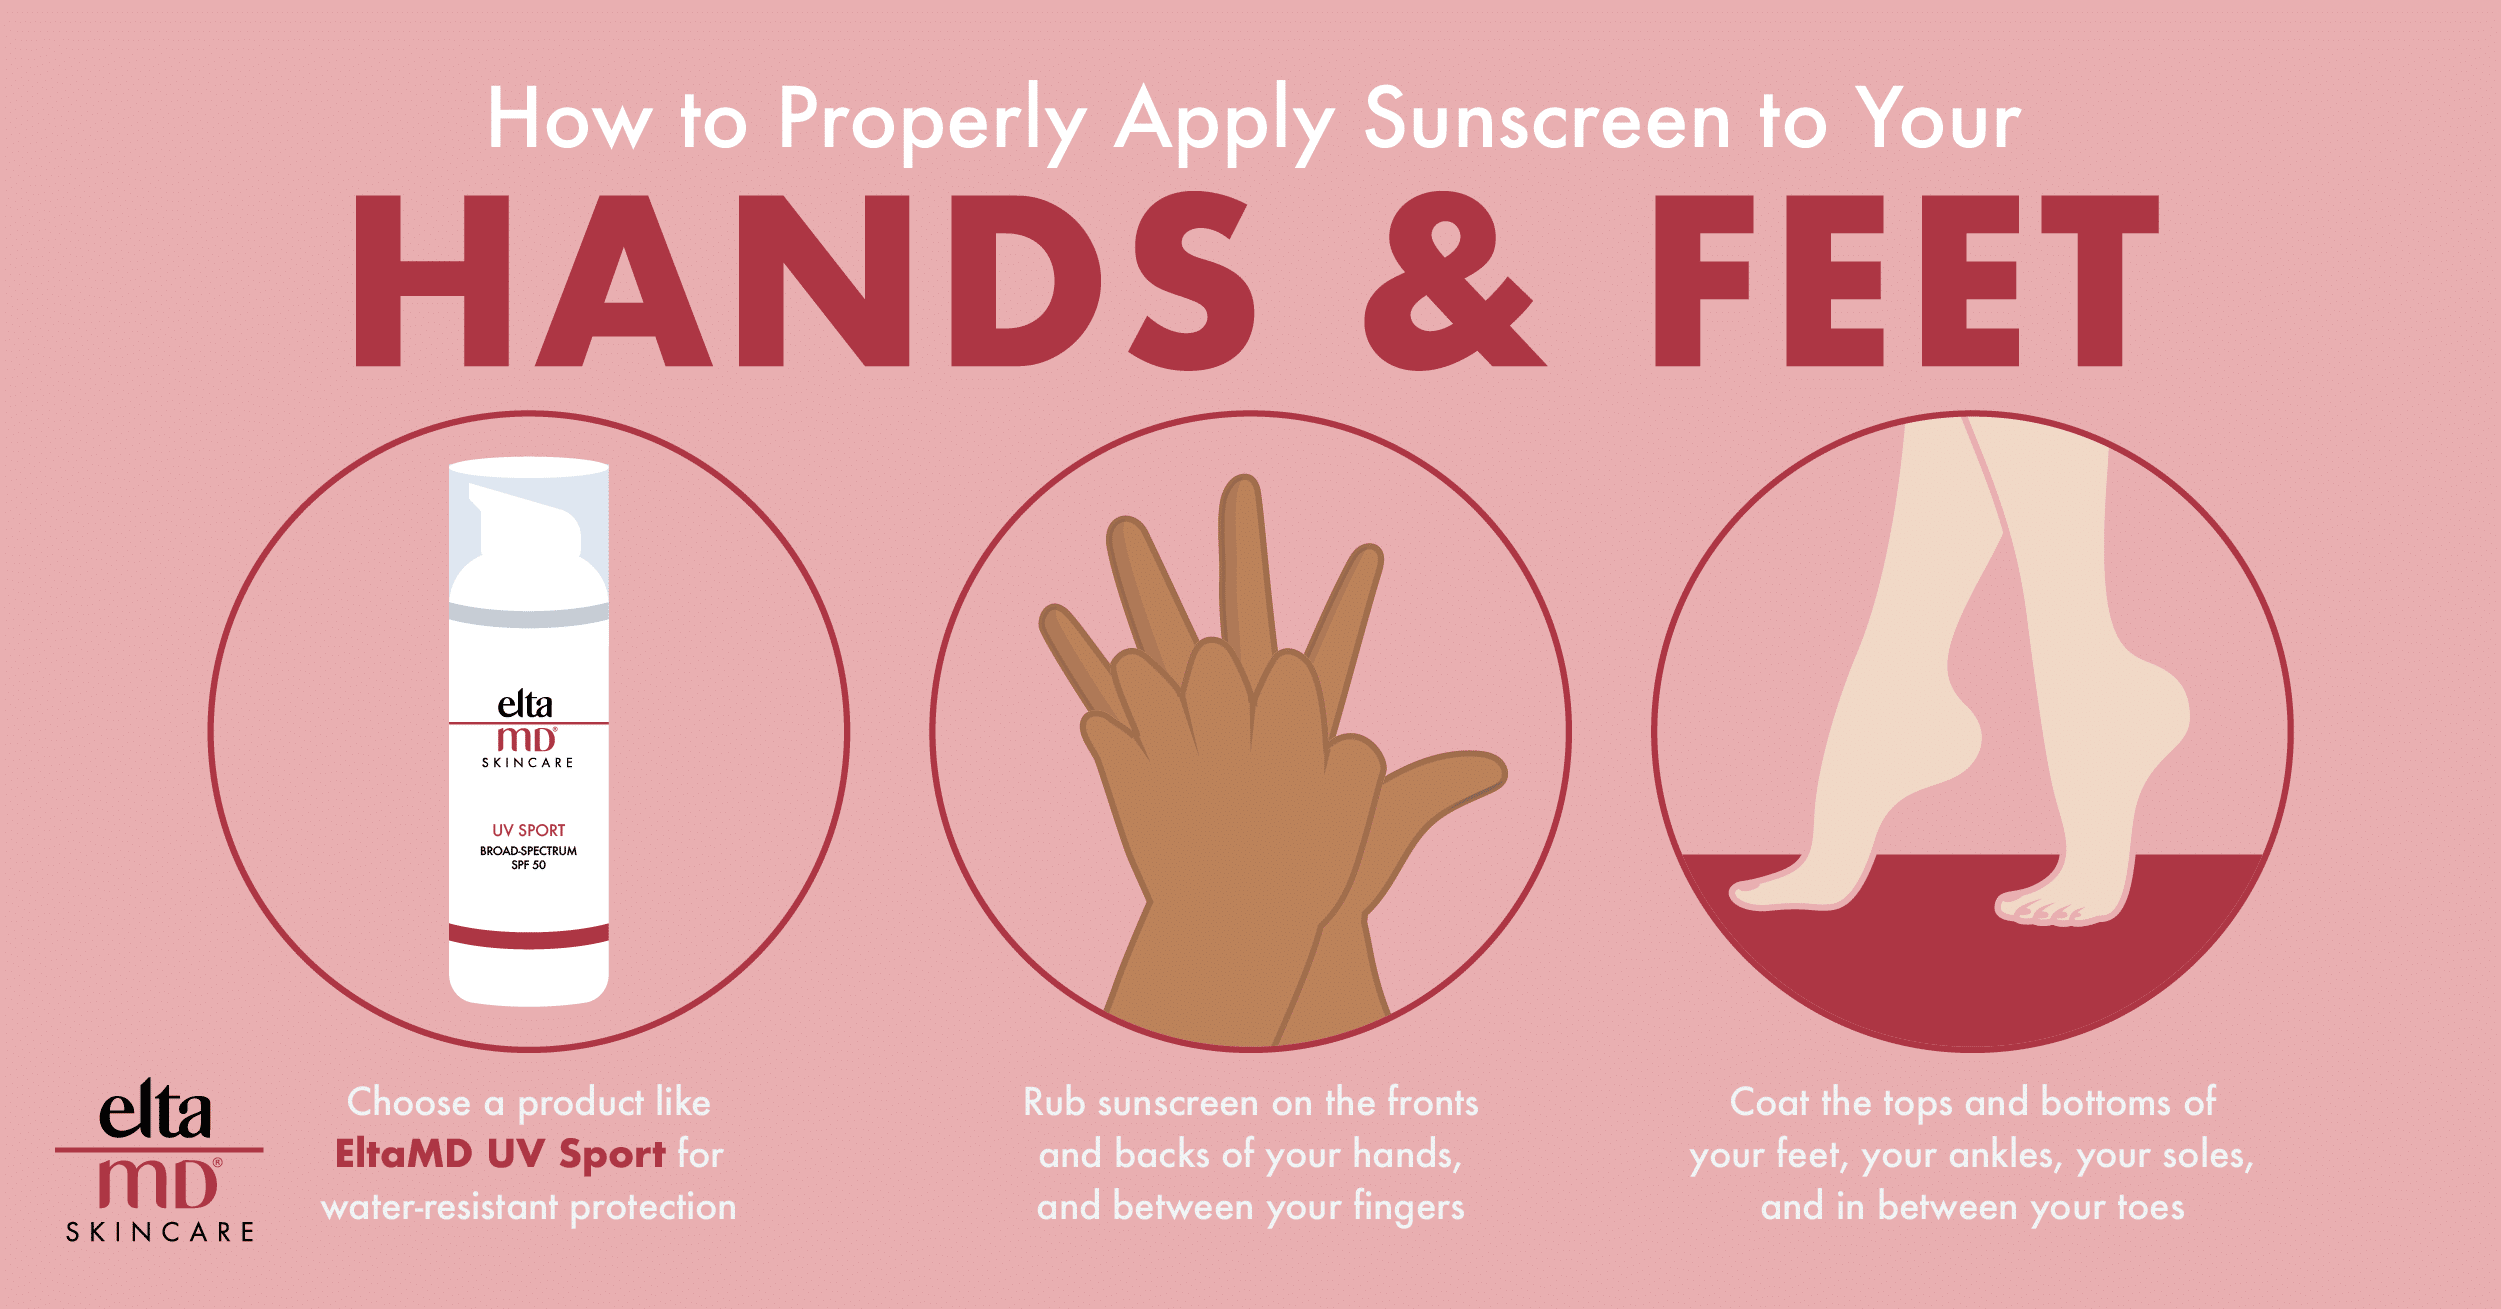 How to Properly Apply Sunscreen to Your Hands and Feet